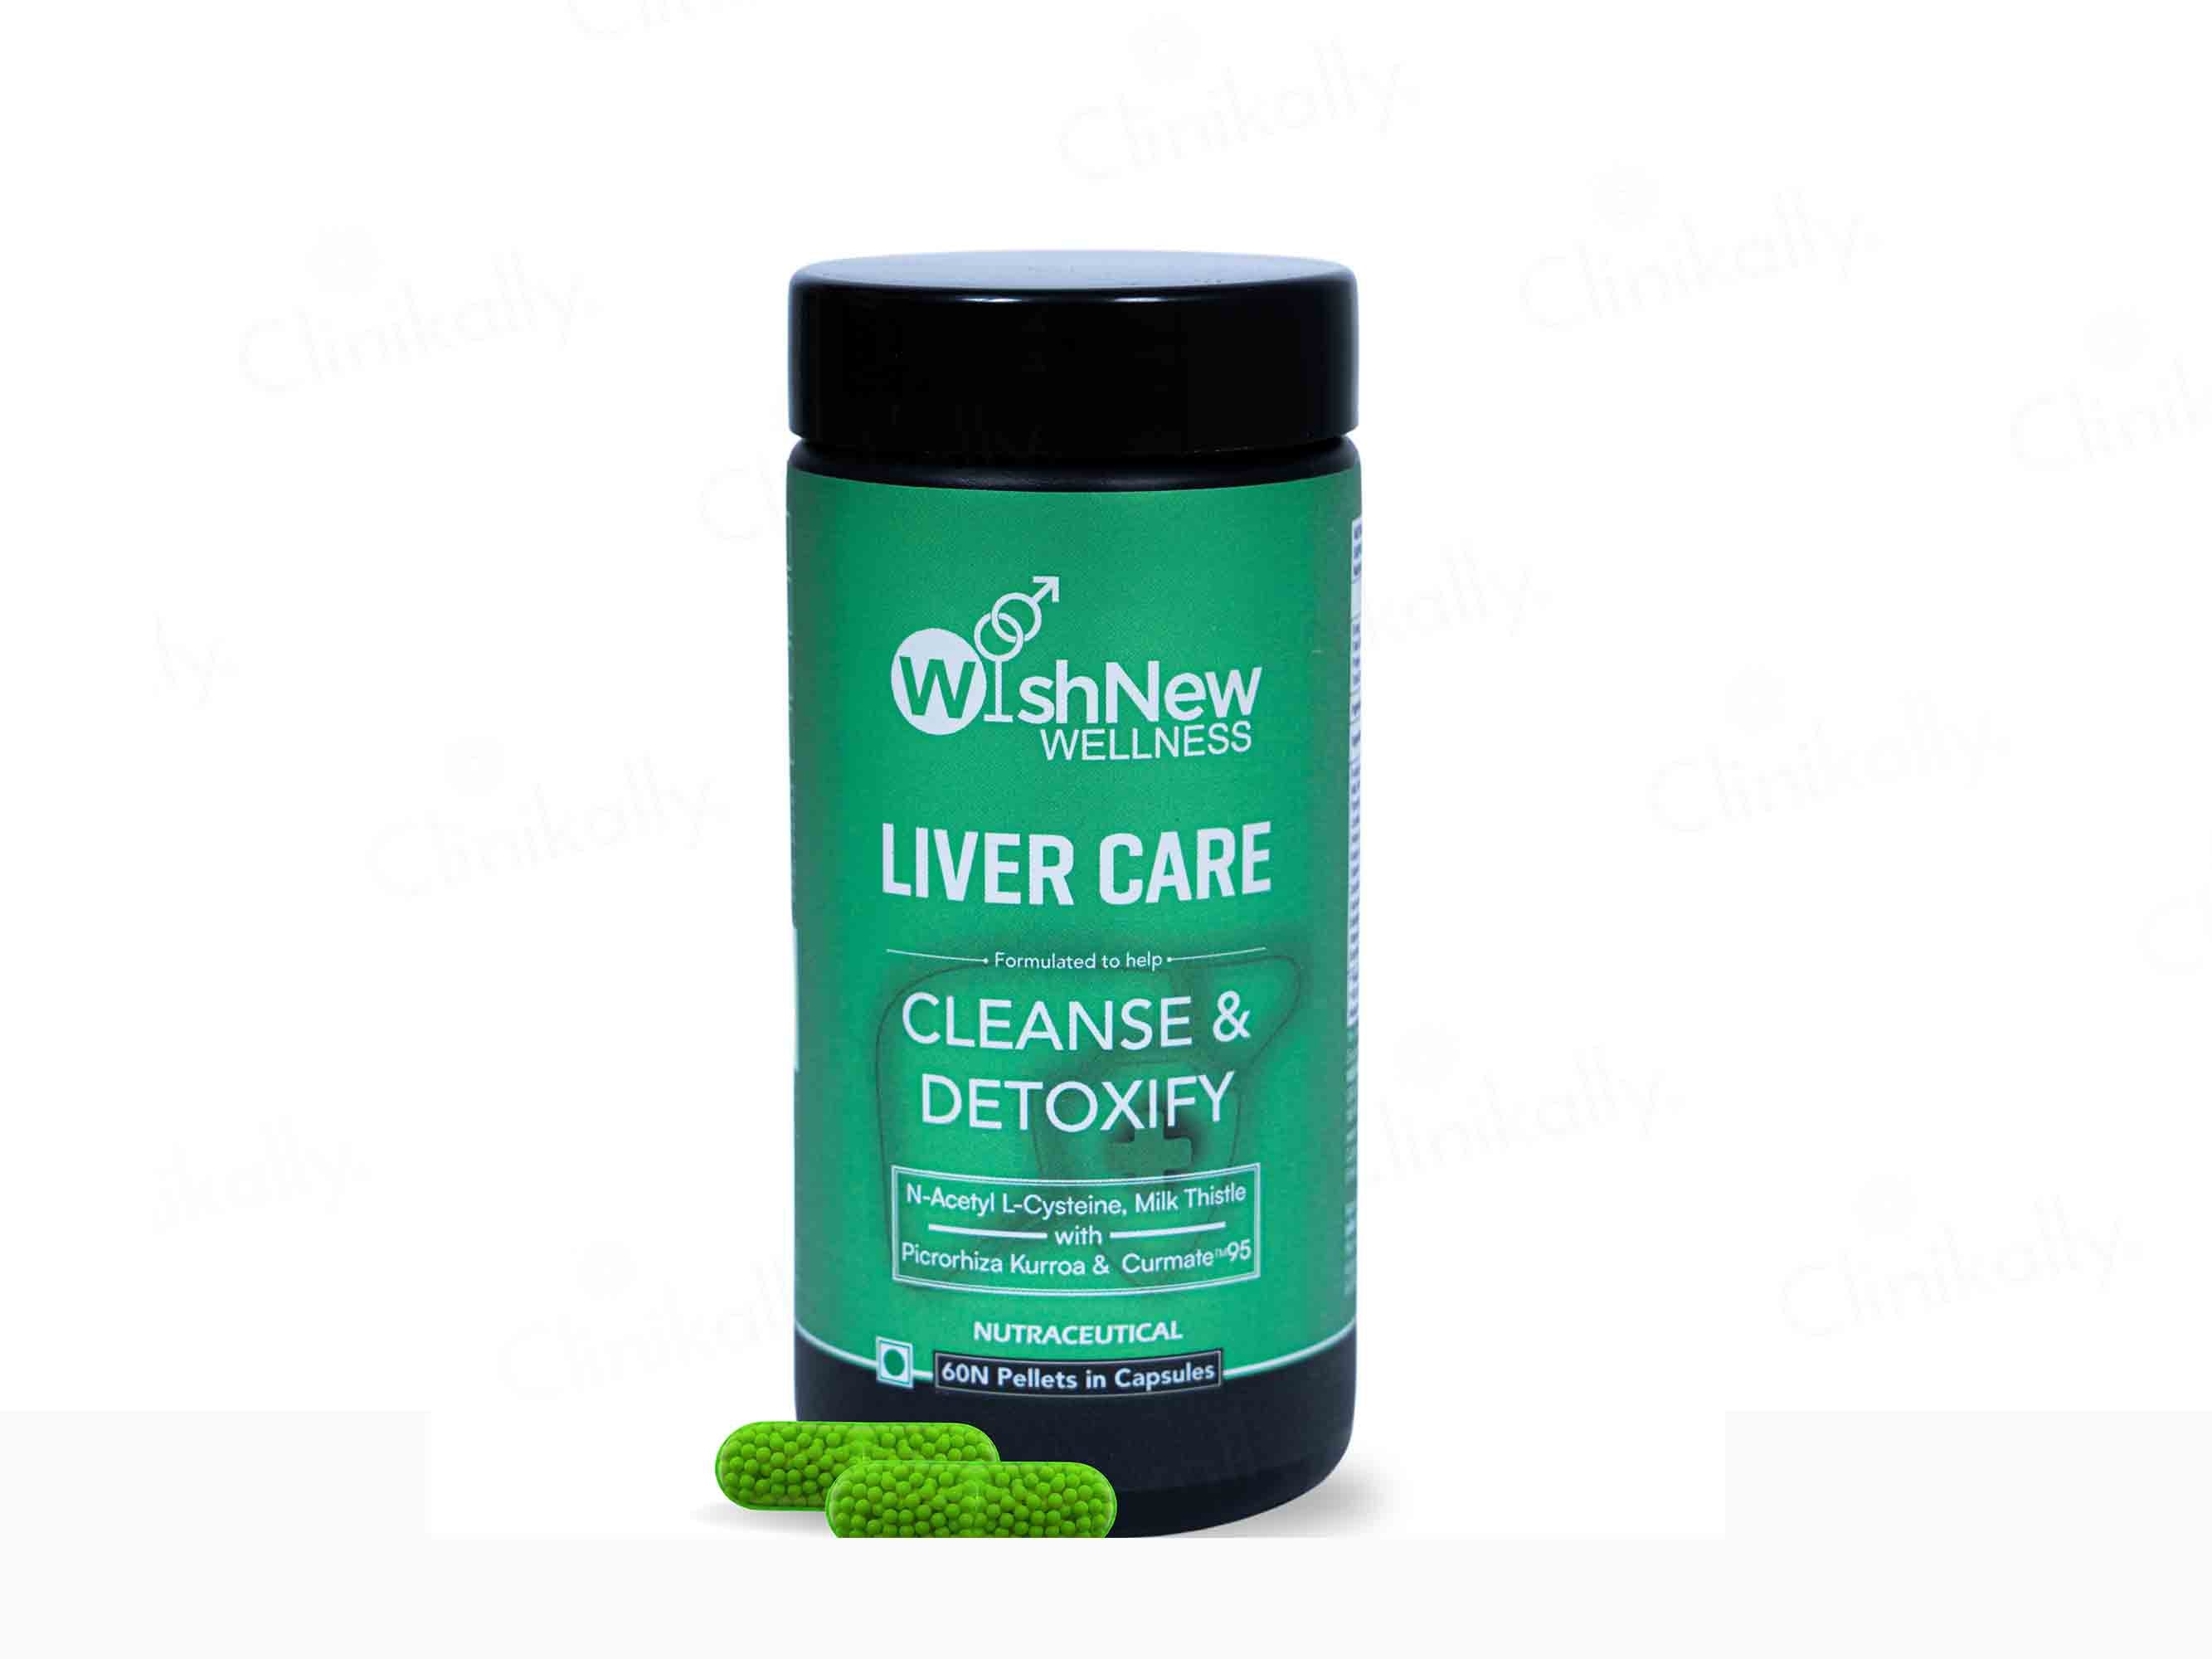 WishNew Wellness Liver Care Cleanse & Detoxify Capsule